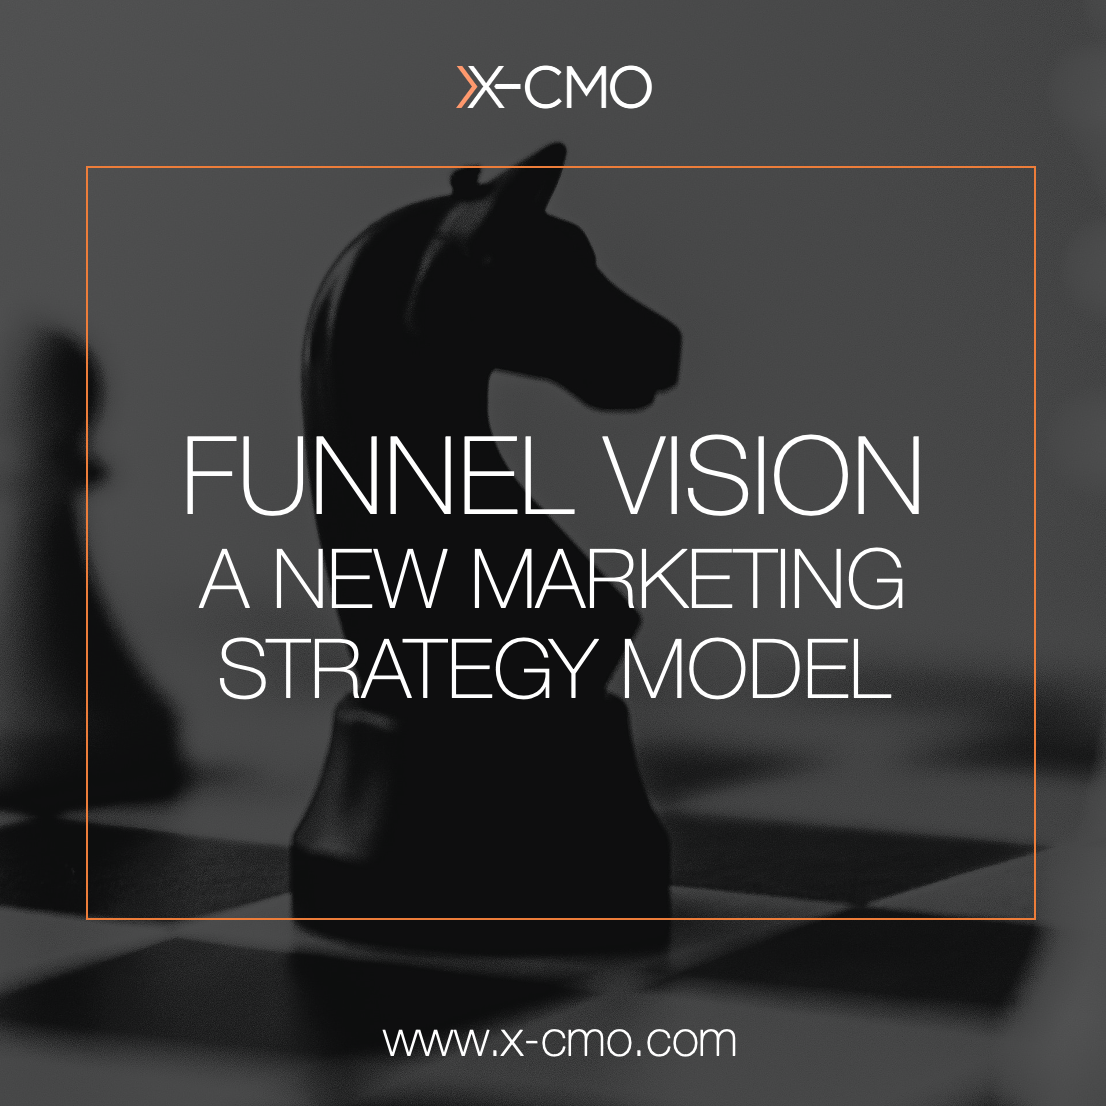 FUNNEL-VISION? HERE’S A NEW MARKETING STRATEGY MODEL THAT SHOWS YOU THE FULL PICTURE